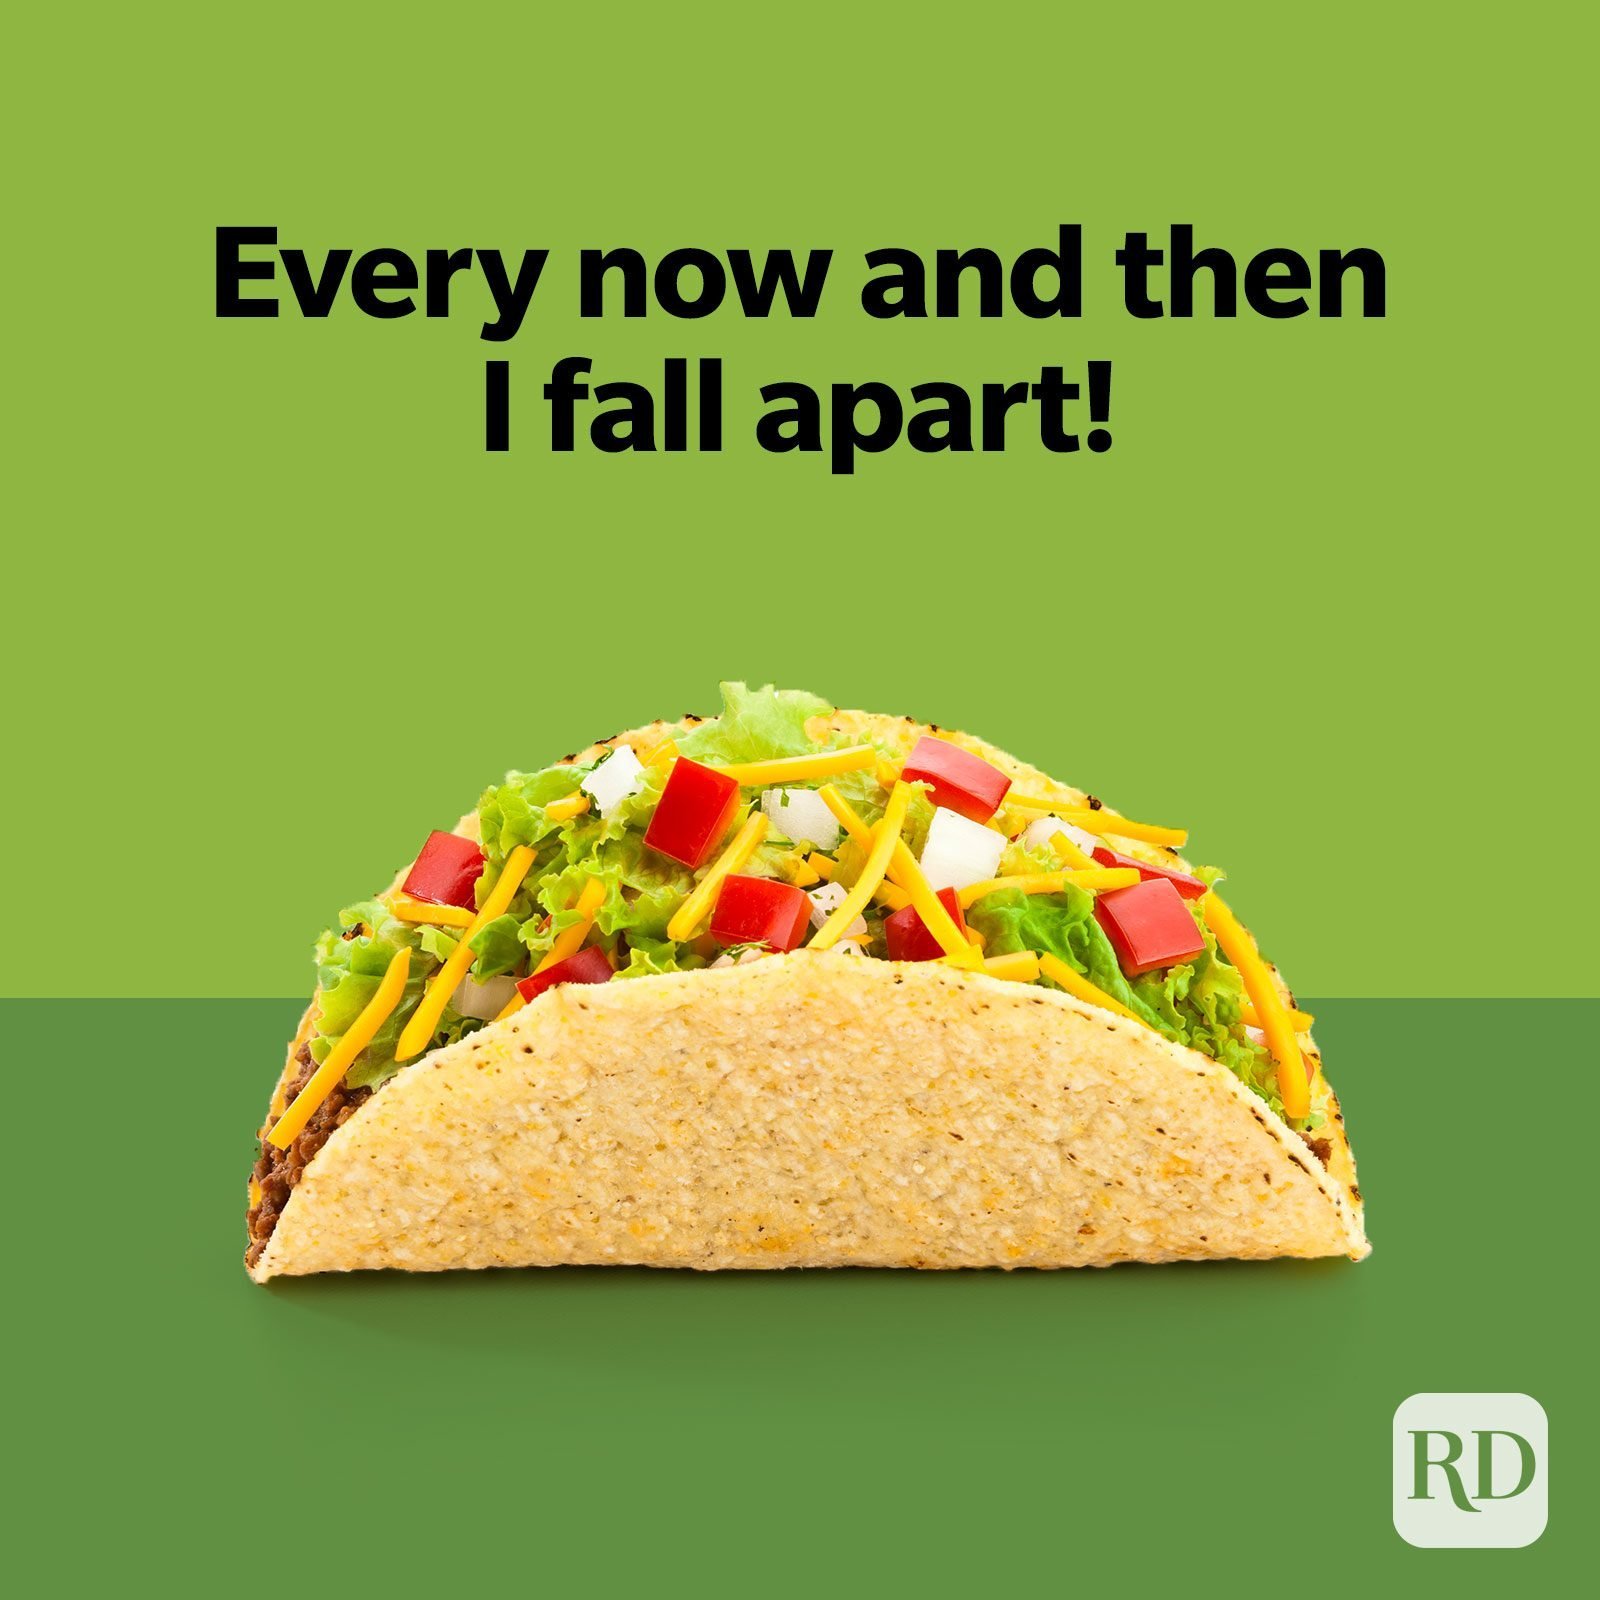 25 Taco Puns That Will Shell Out the Laughs